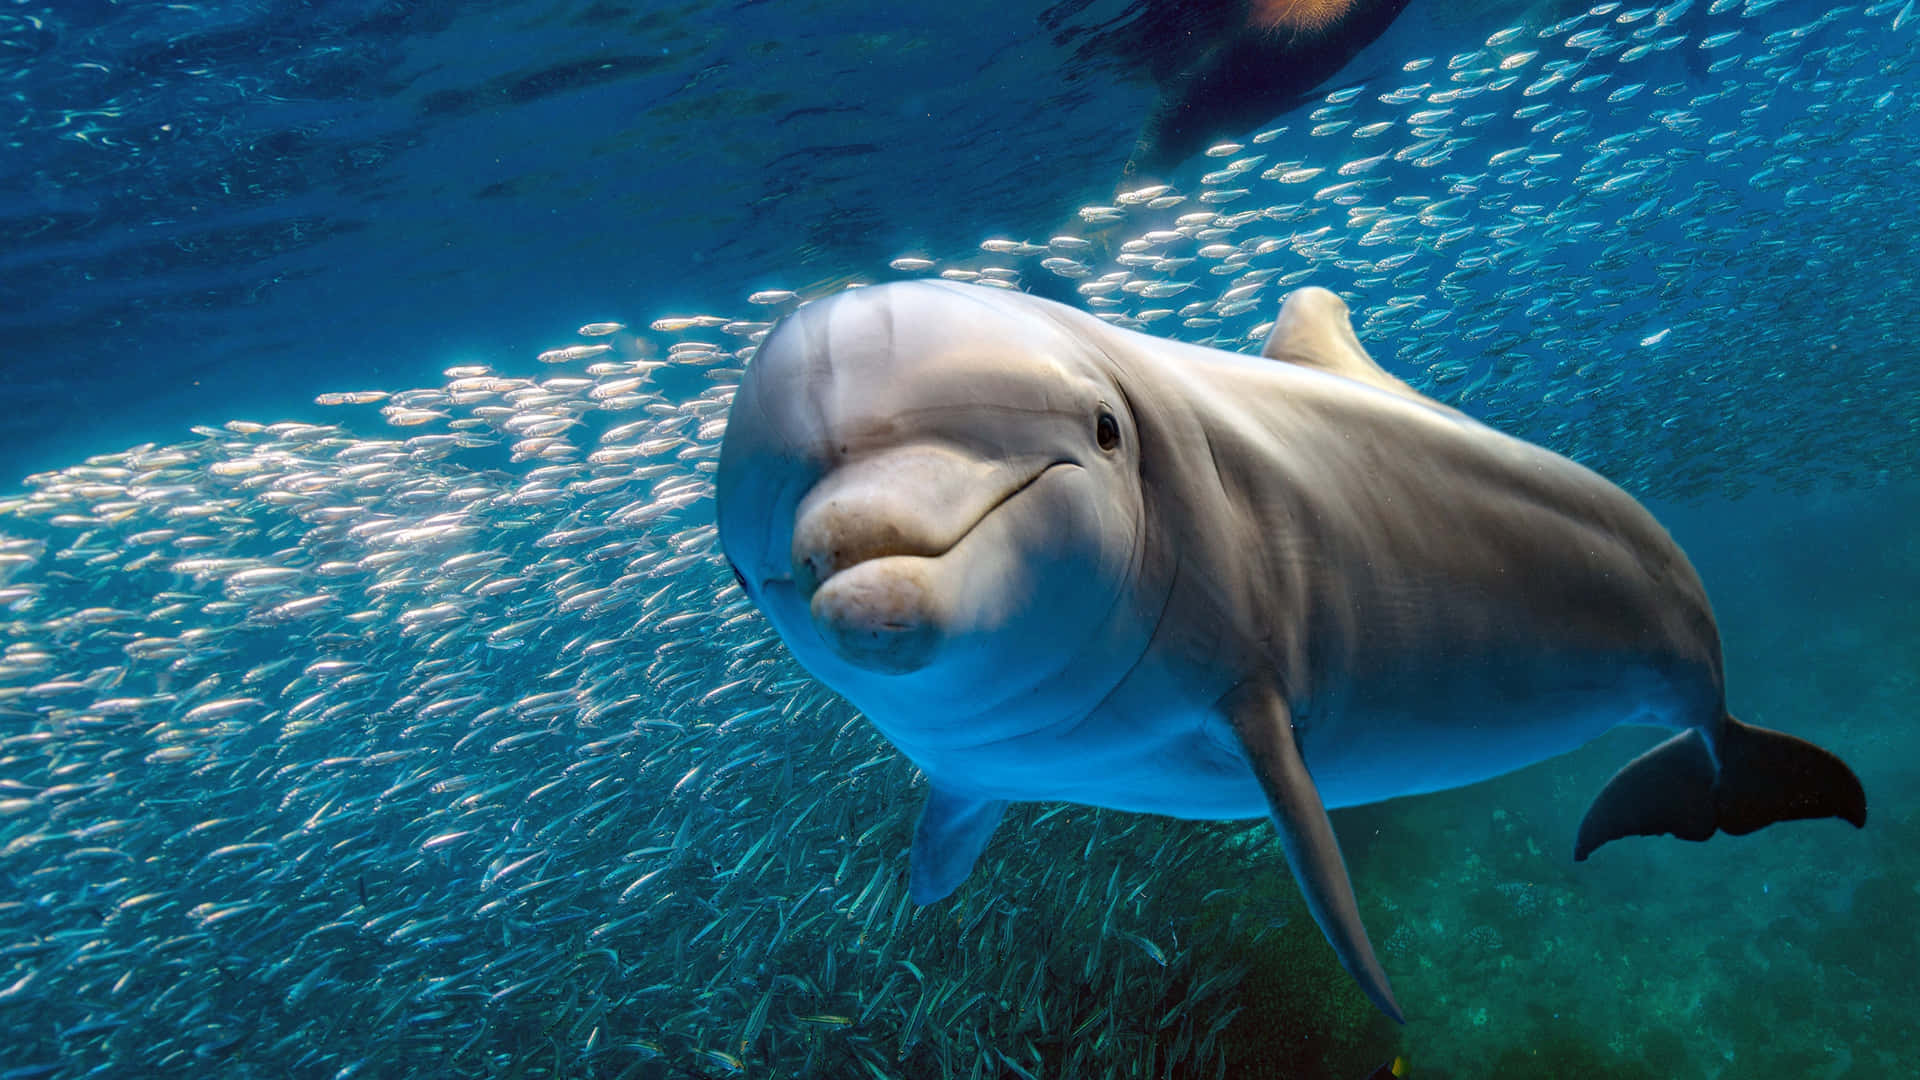 Get ready to explore the beautiful marine world with this inquisitive Dolphin.